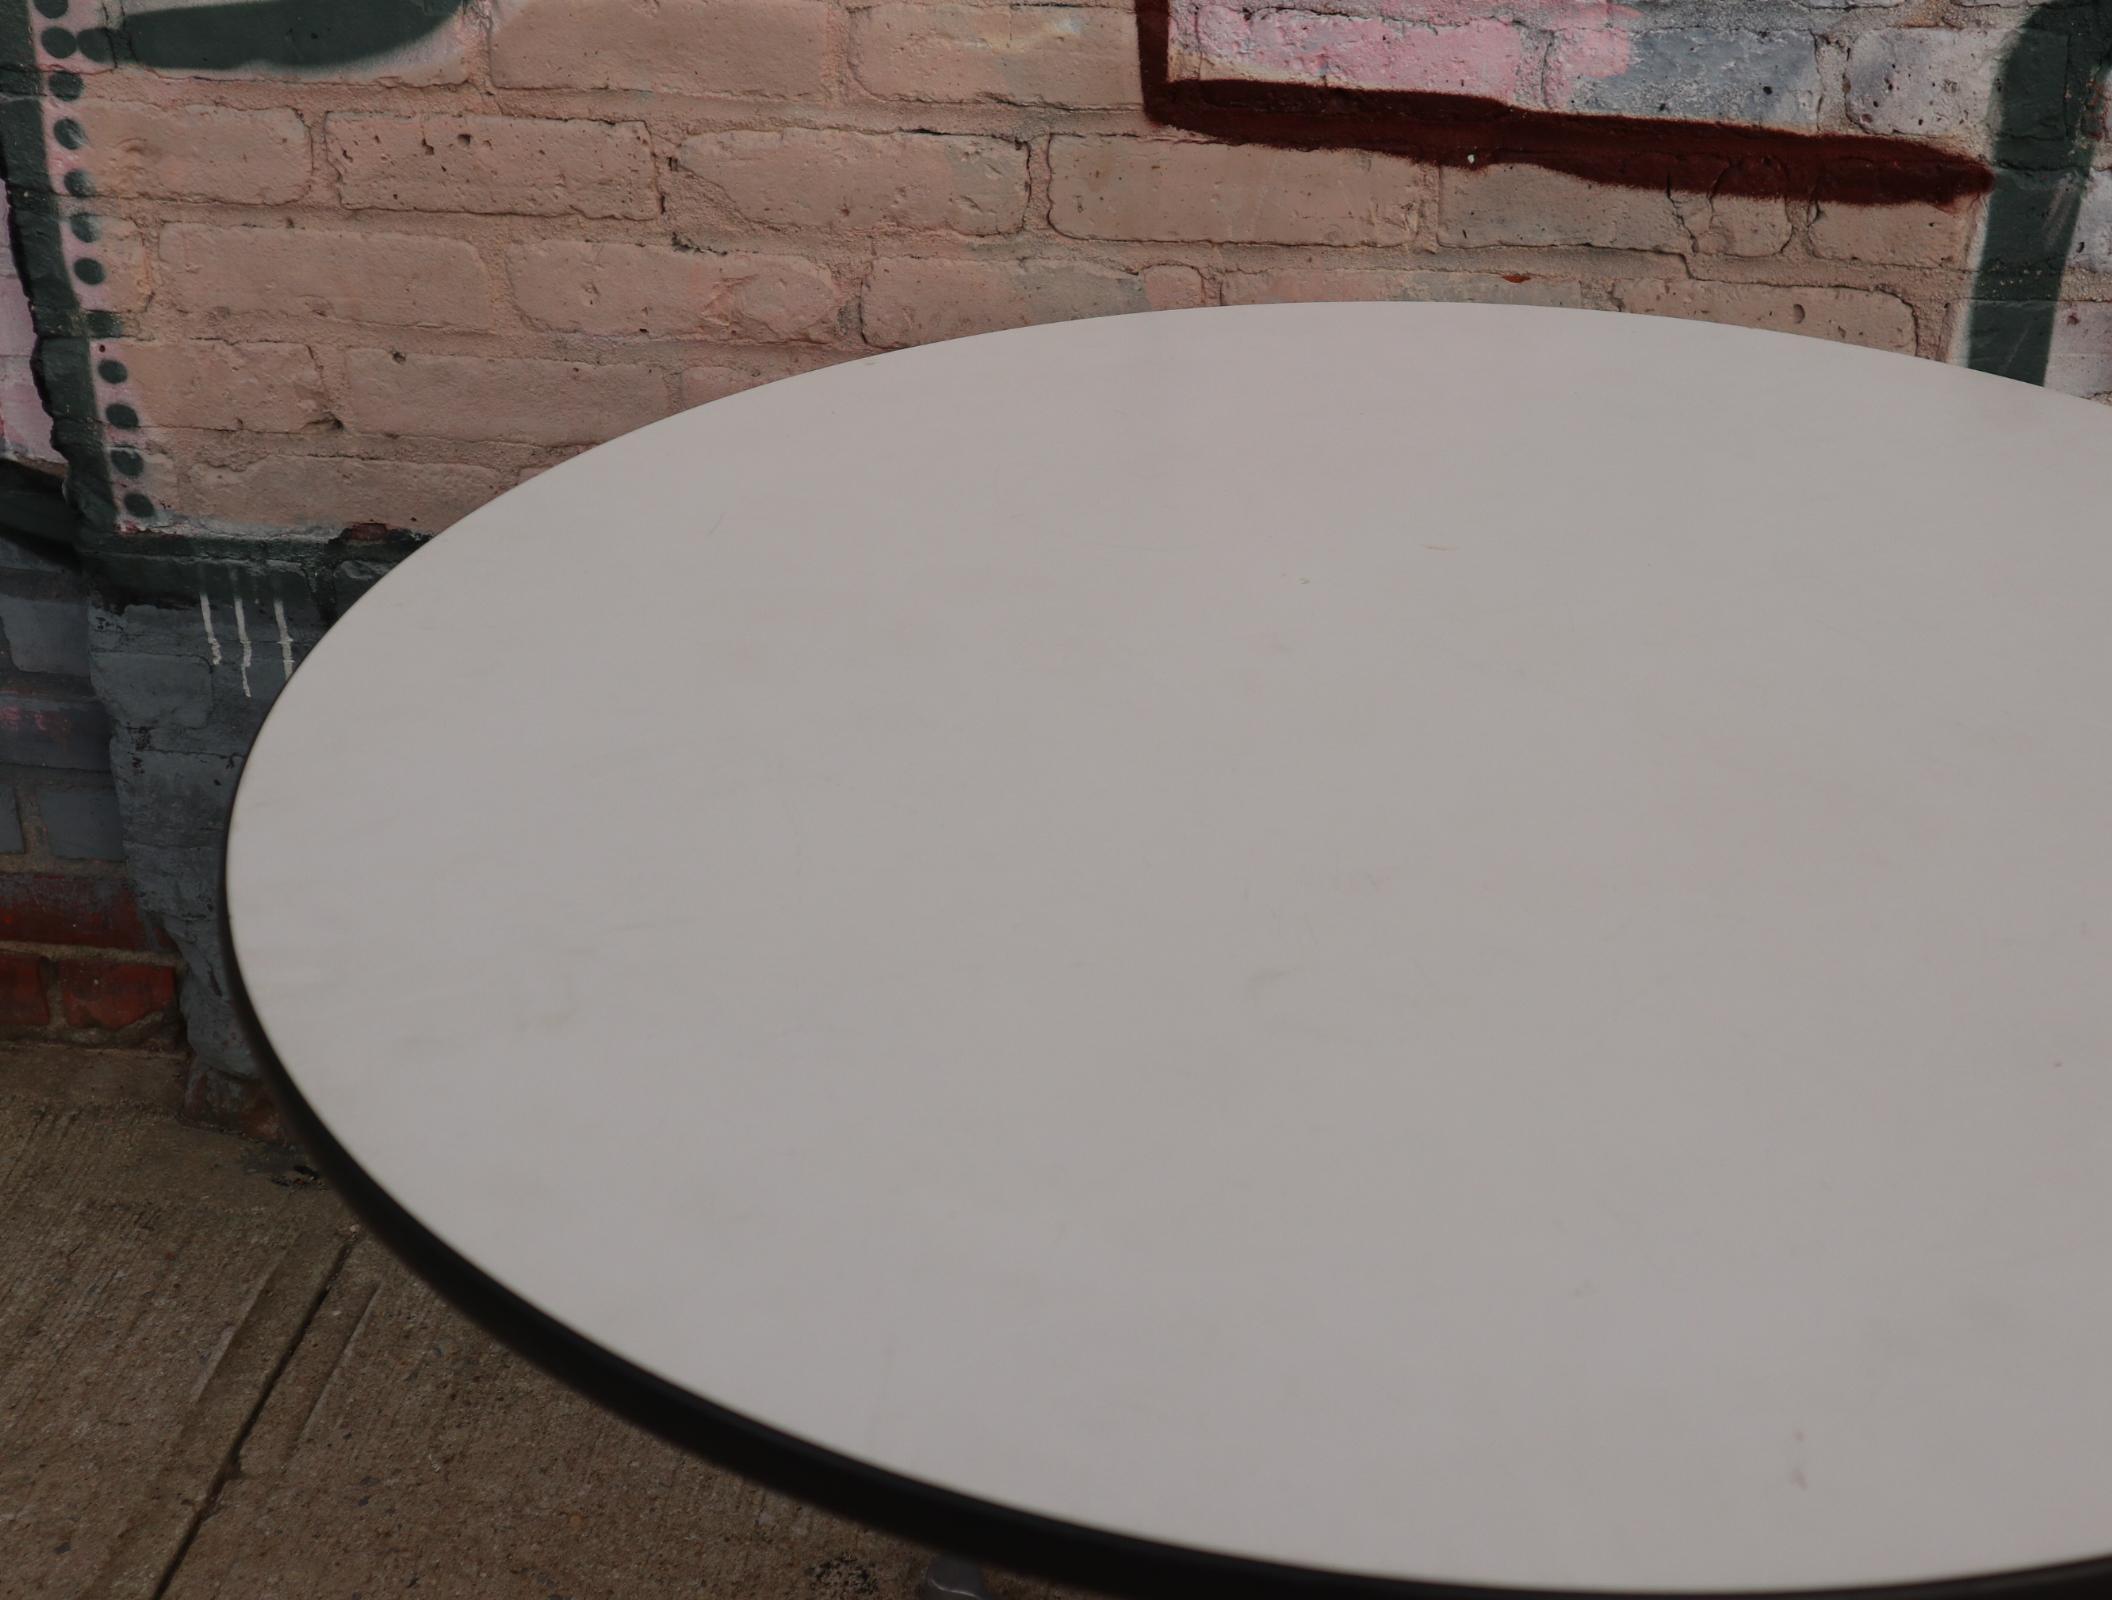 eames round table